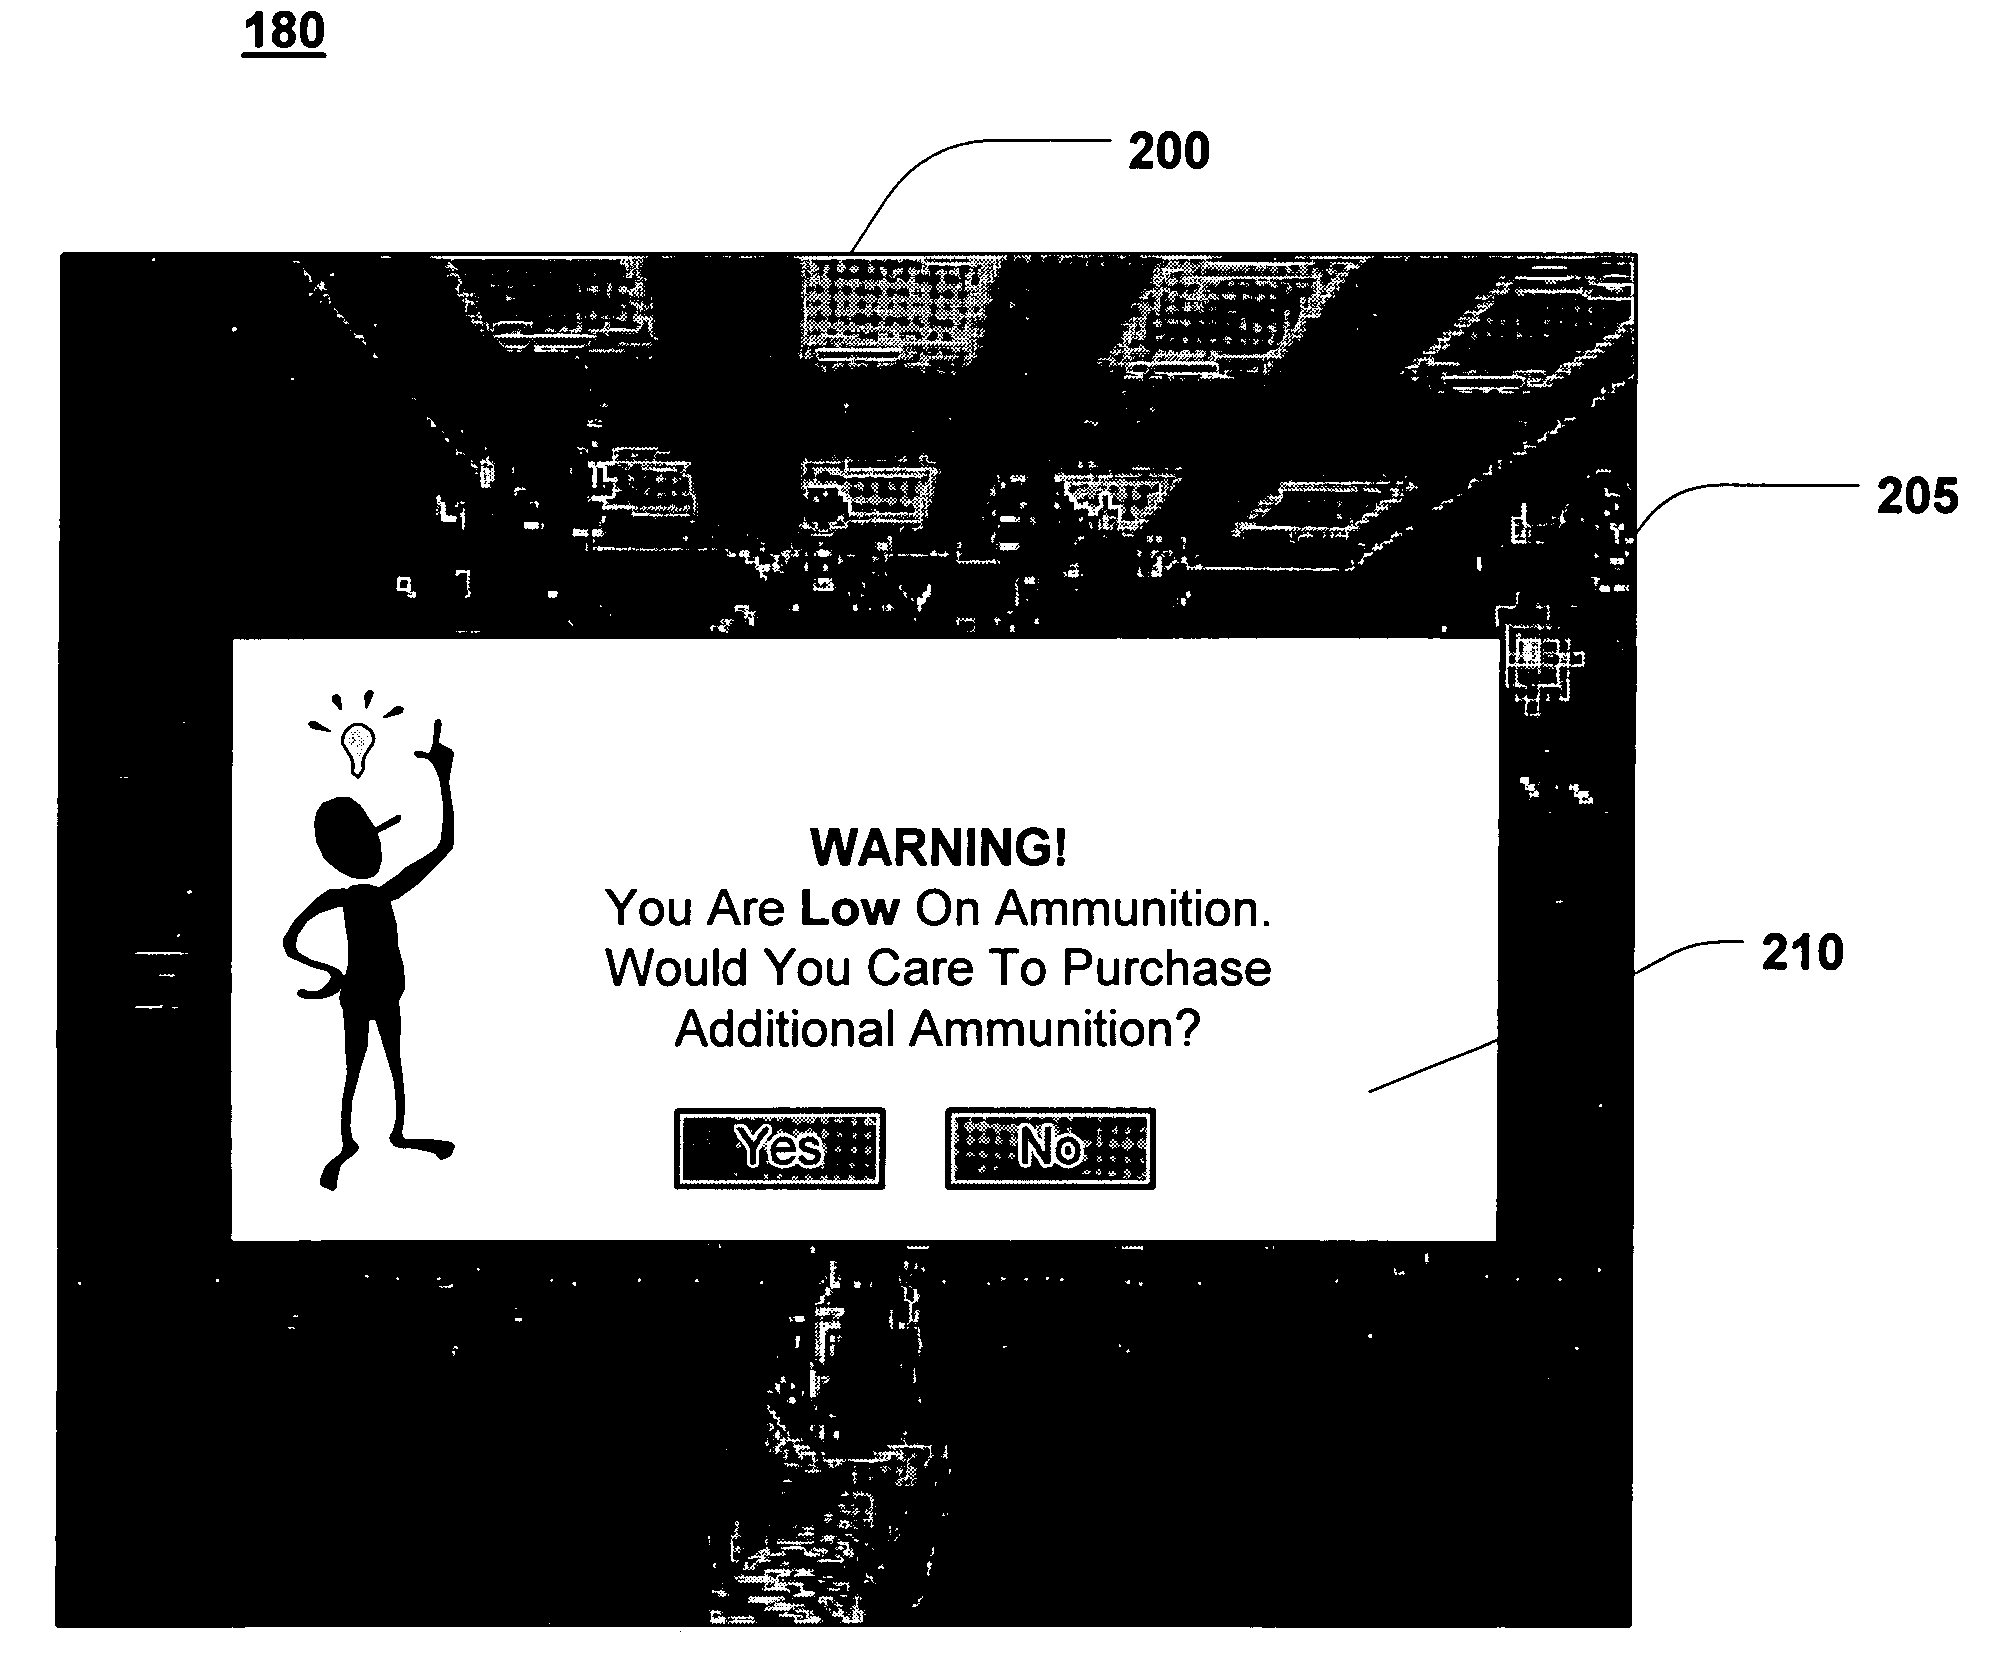 System and methods for obtaining advantages and transacting the same in a computer gaming environment